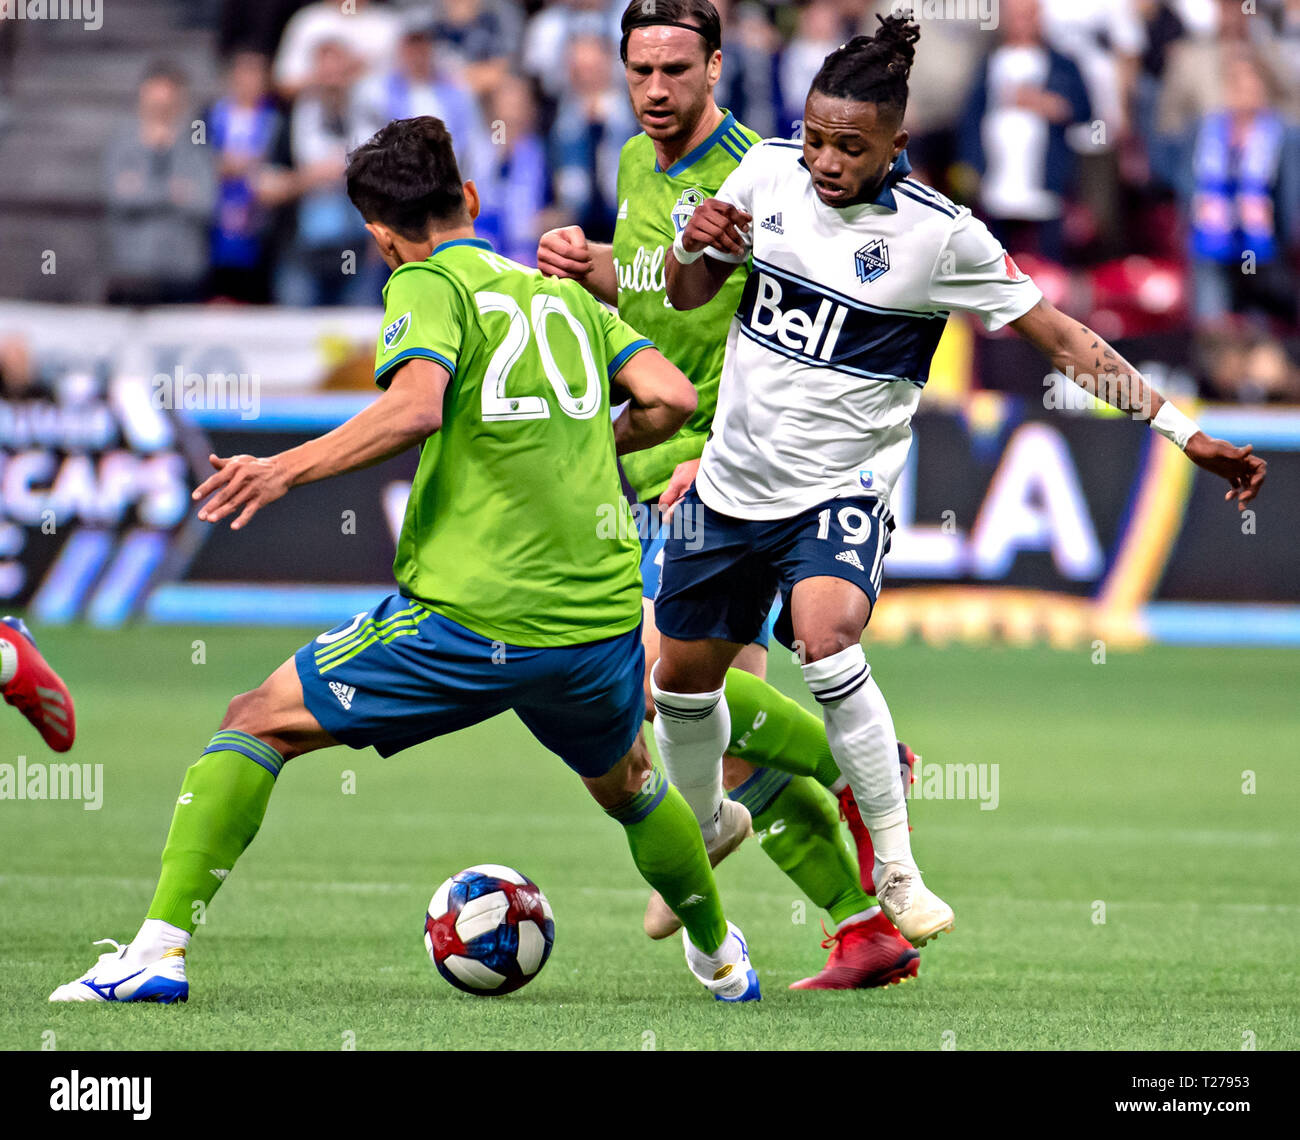 Vancouver, Canada. 30th Mar, 2019. Seattle Sounders' Kim Kee-hee (L) and Vancouver Whitecaps' Lass Bangoura compete during the MLS soccer match between Vancouver Whitecaps and Seattle Sounders in Vancouver, Canada, March 30, 2019. The match ended with a 0-0 draw. Credit: Andrew Soong/Xinhua/Alamy Live News Stock Photo